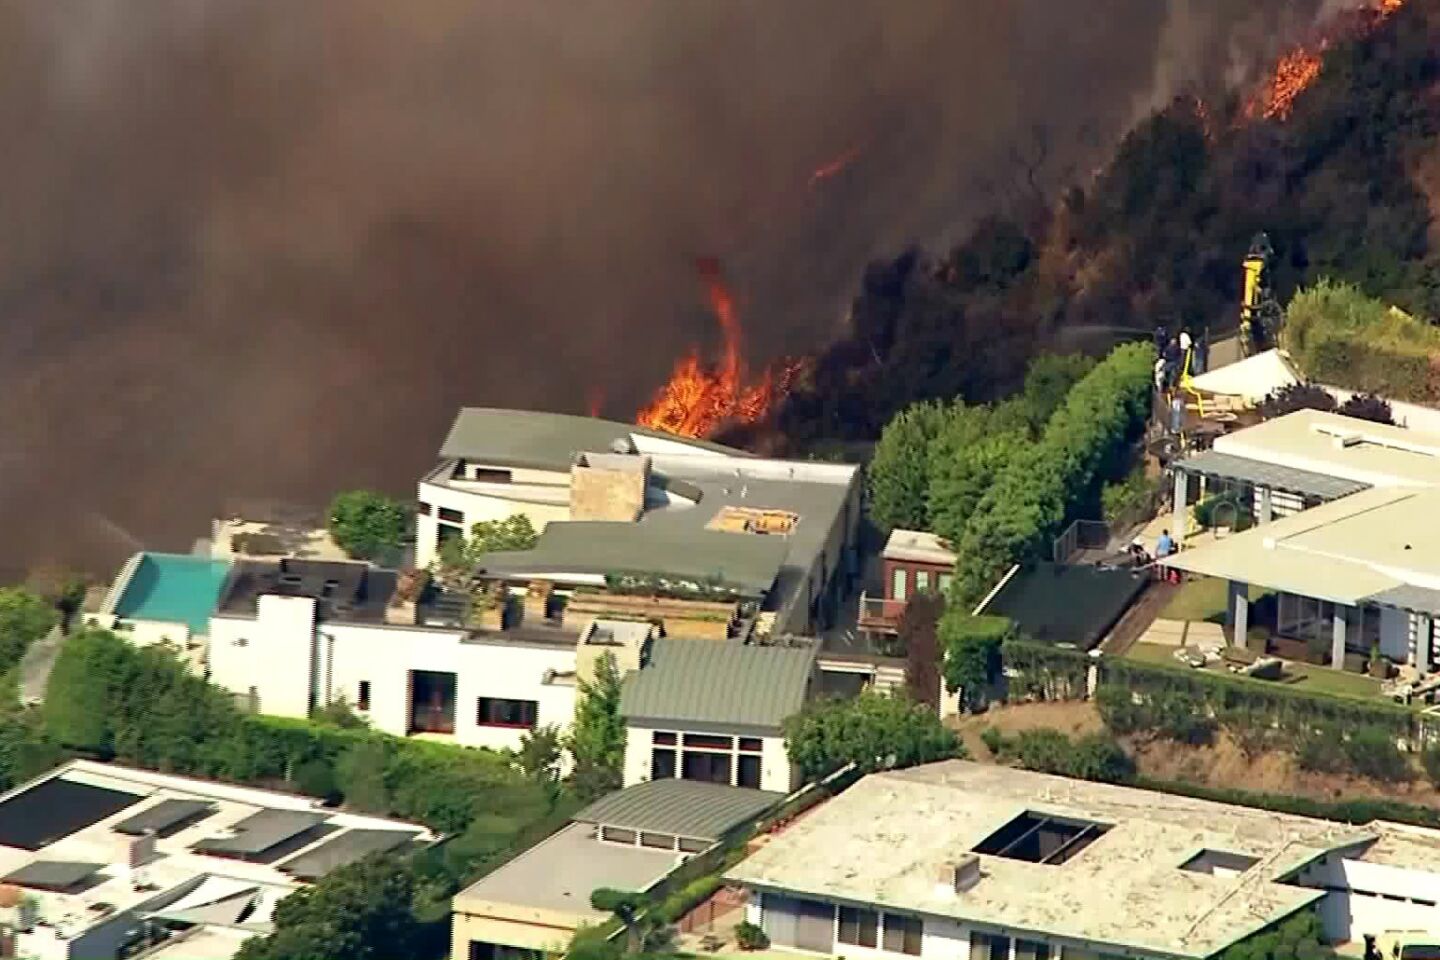 Brush fire threatens homes in Pacific Palisades